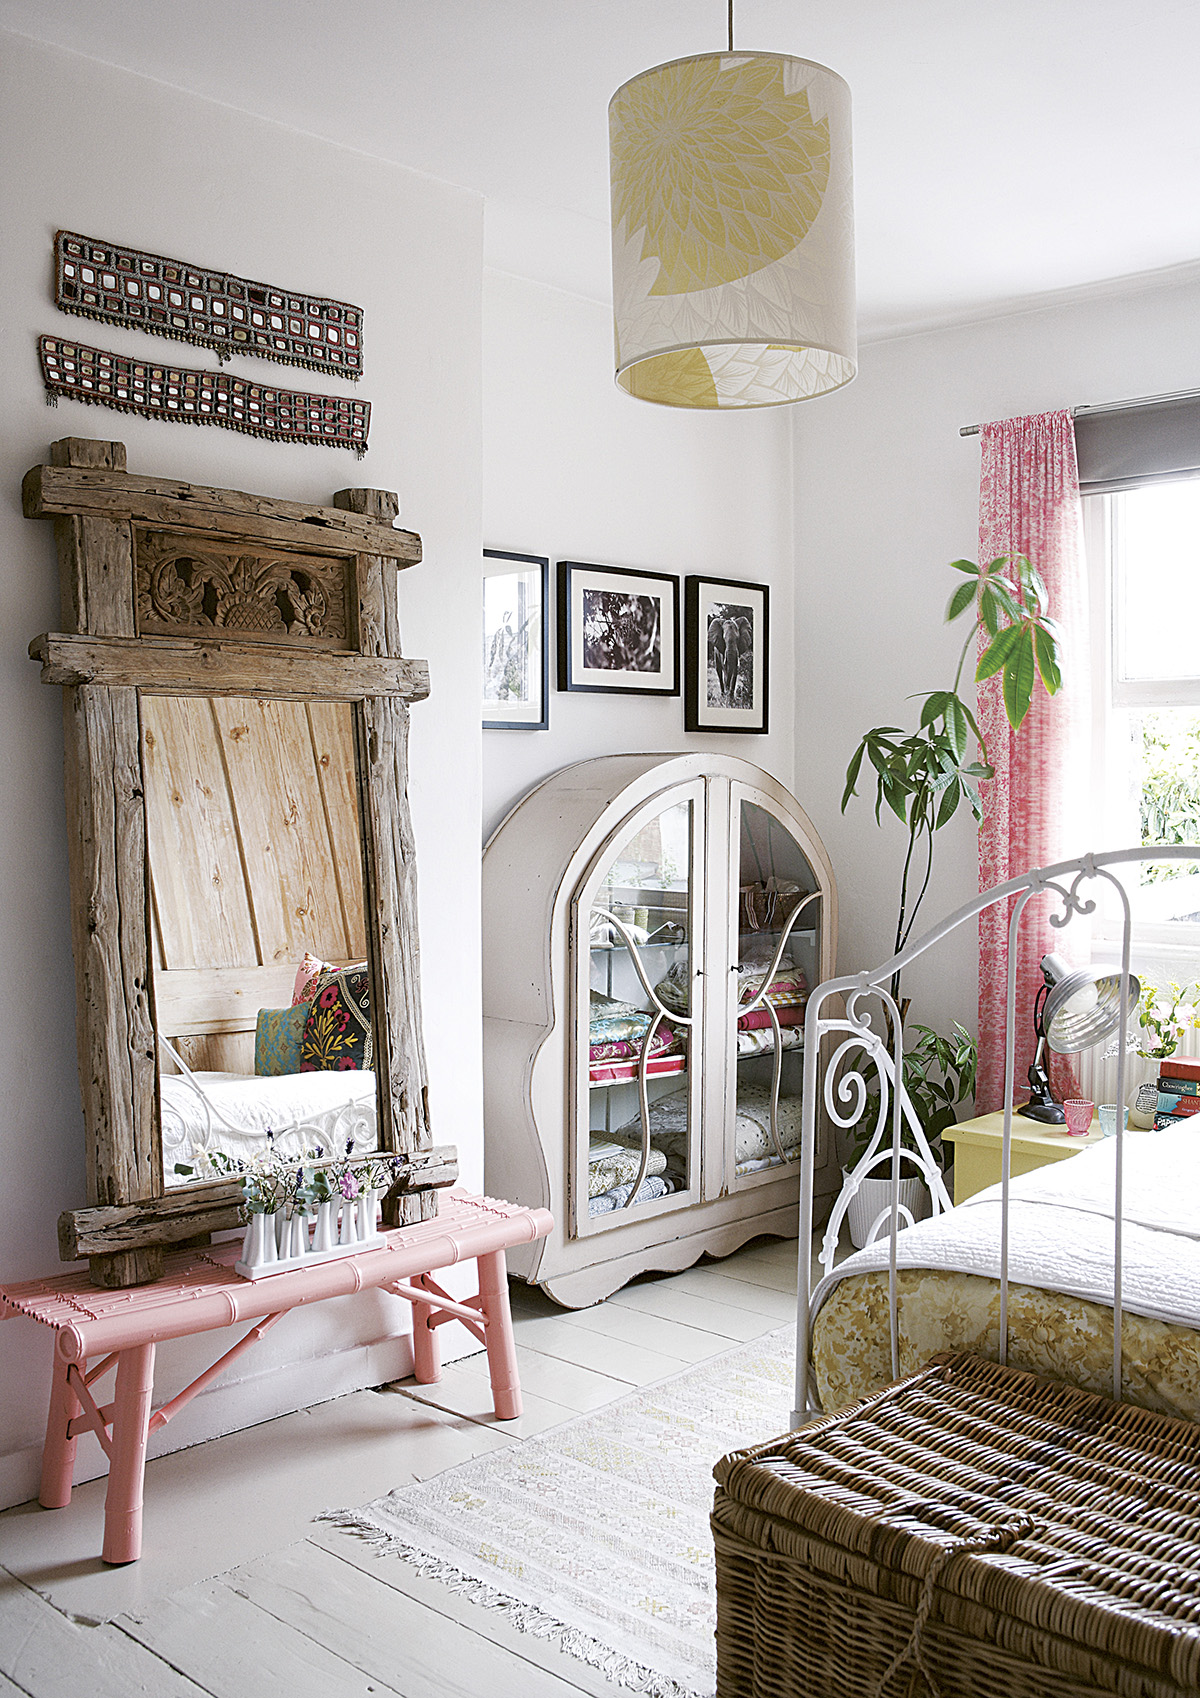 from issue 7 - home tour with Nic Guymer - Photo: Elsa Young